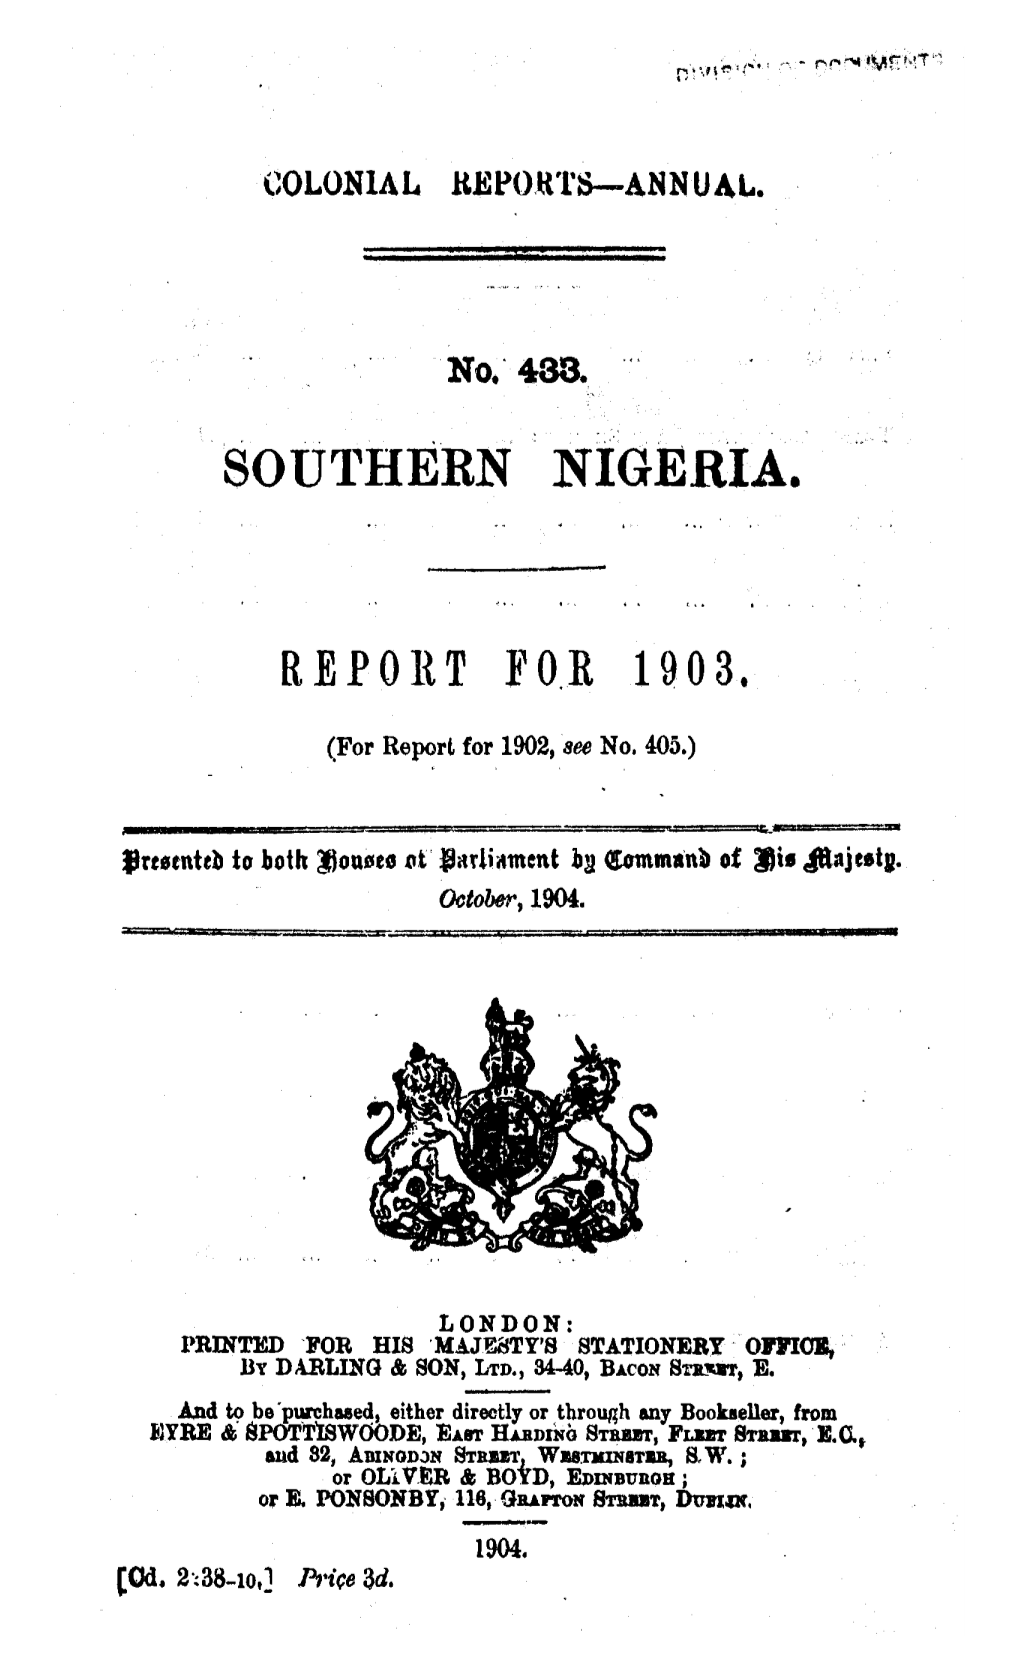 Annual Report of the Colonies, Southern Nigeria, 1903